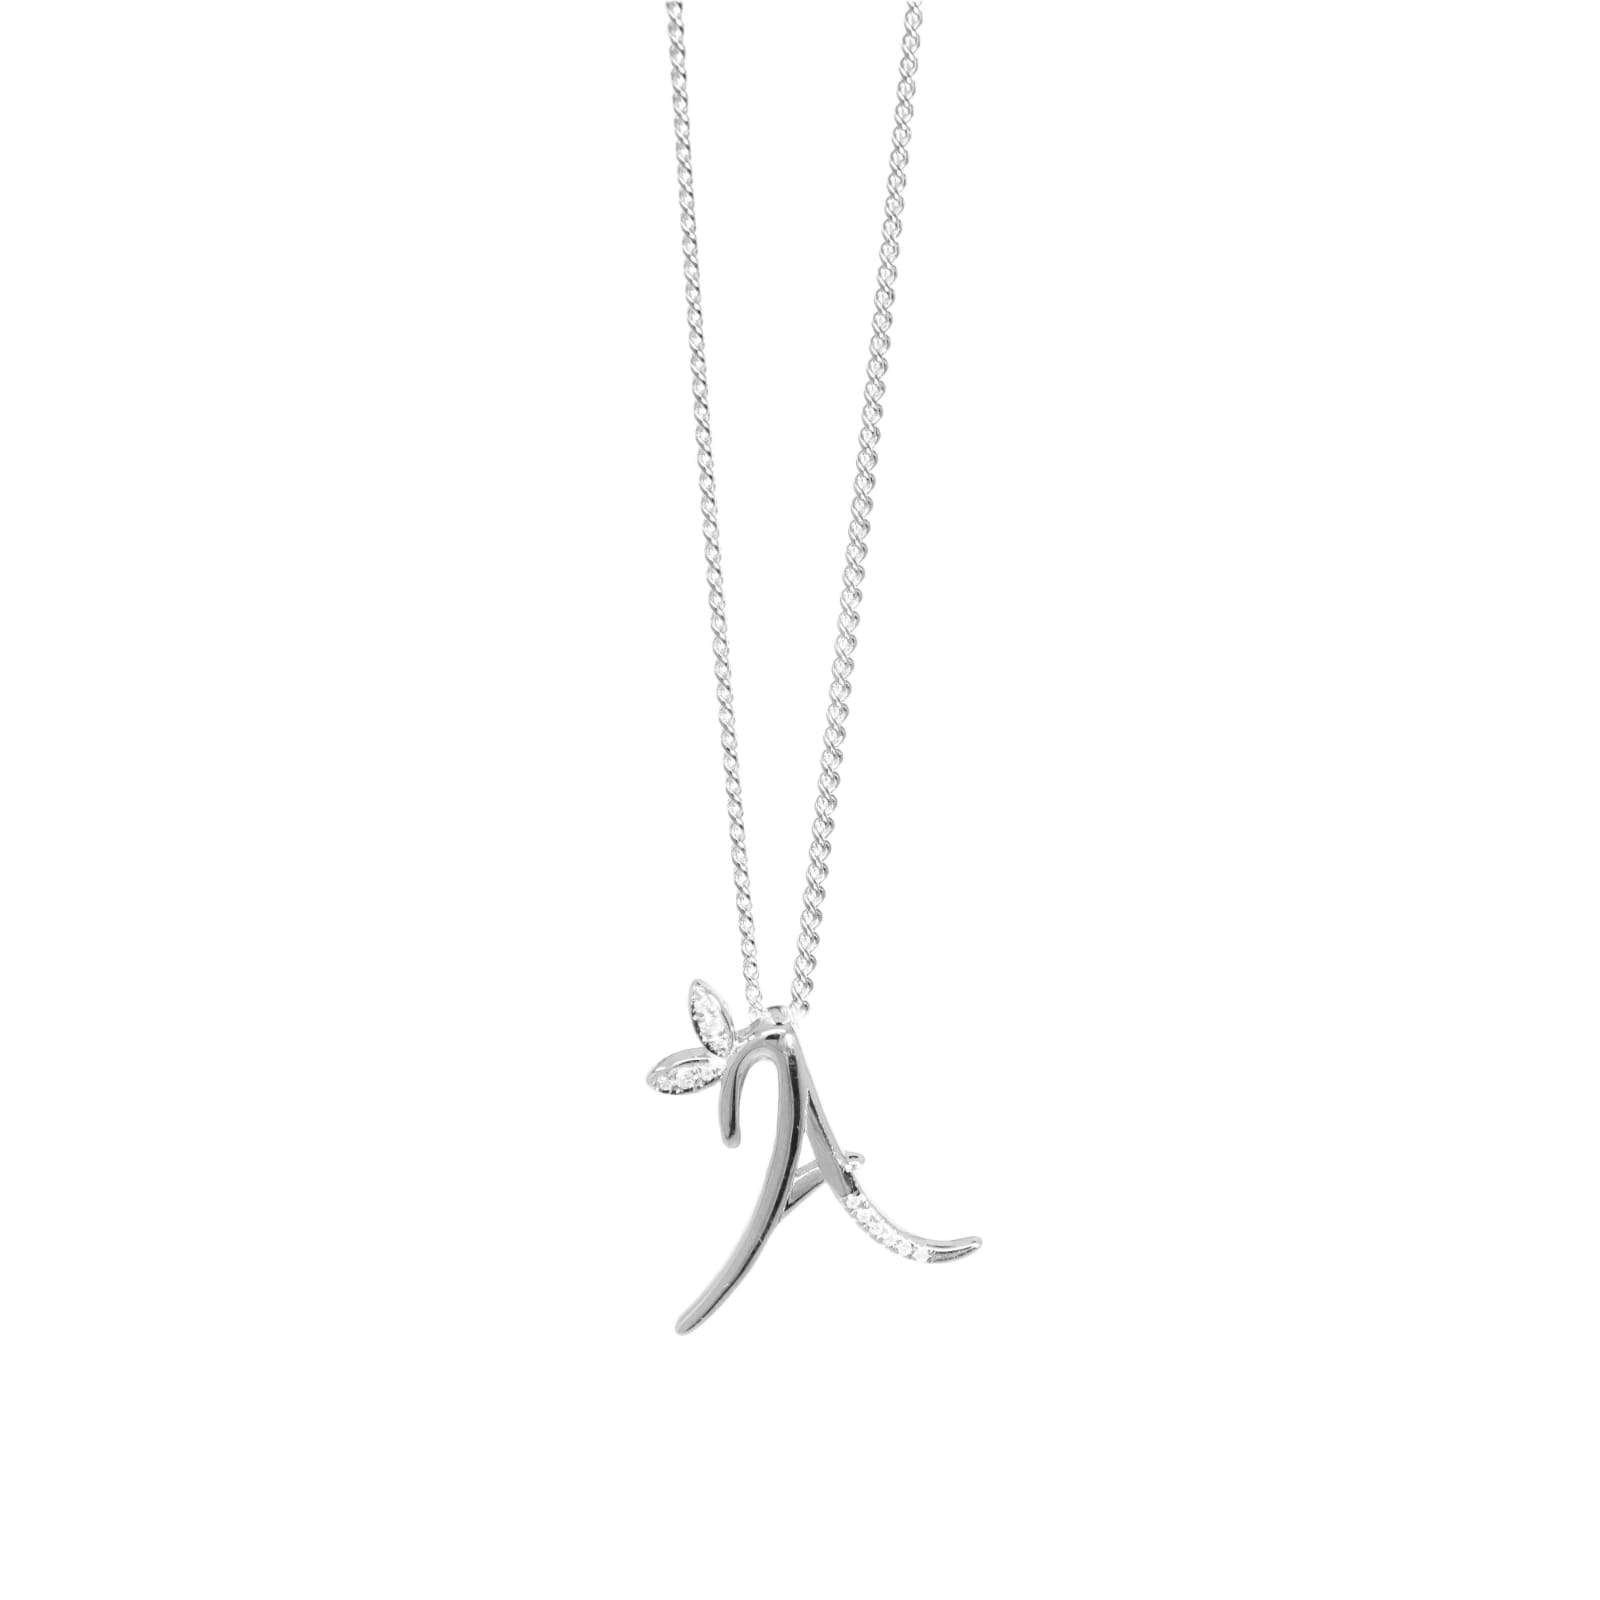 Winged Diamond Fancy Initial Necklace - Sterling Silver - SayItWithDiamonds.com